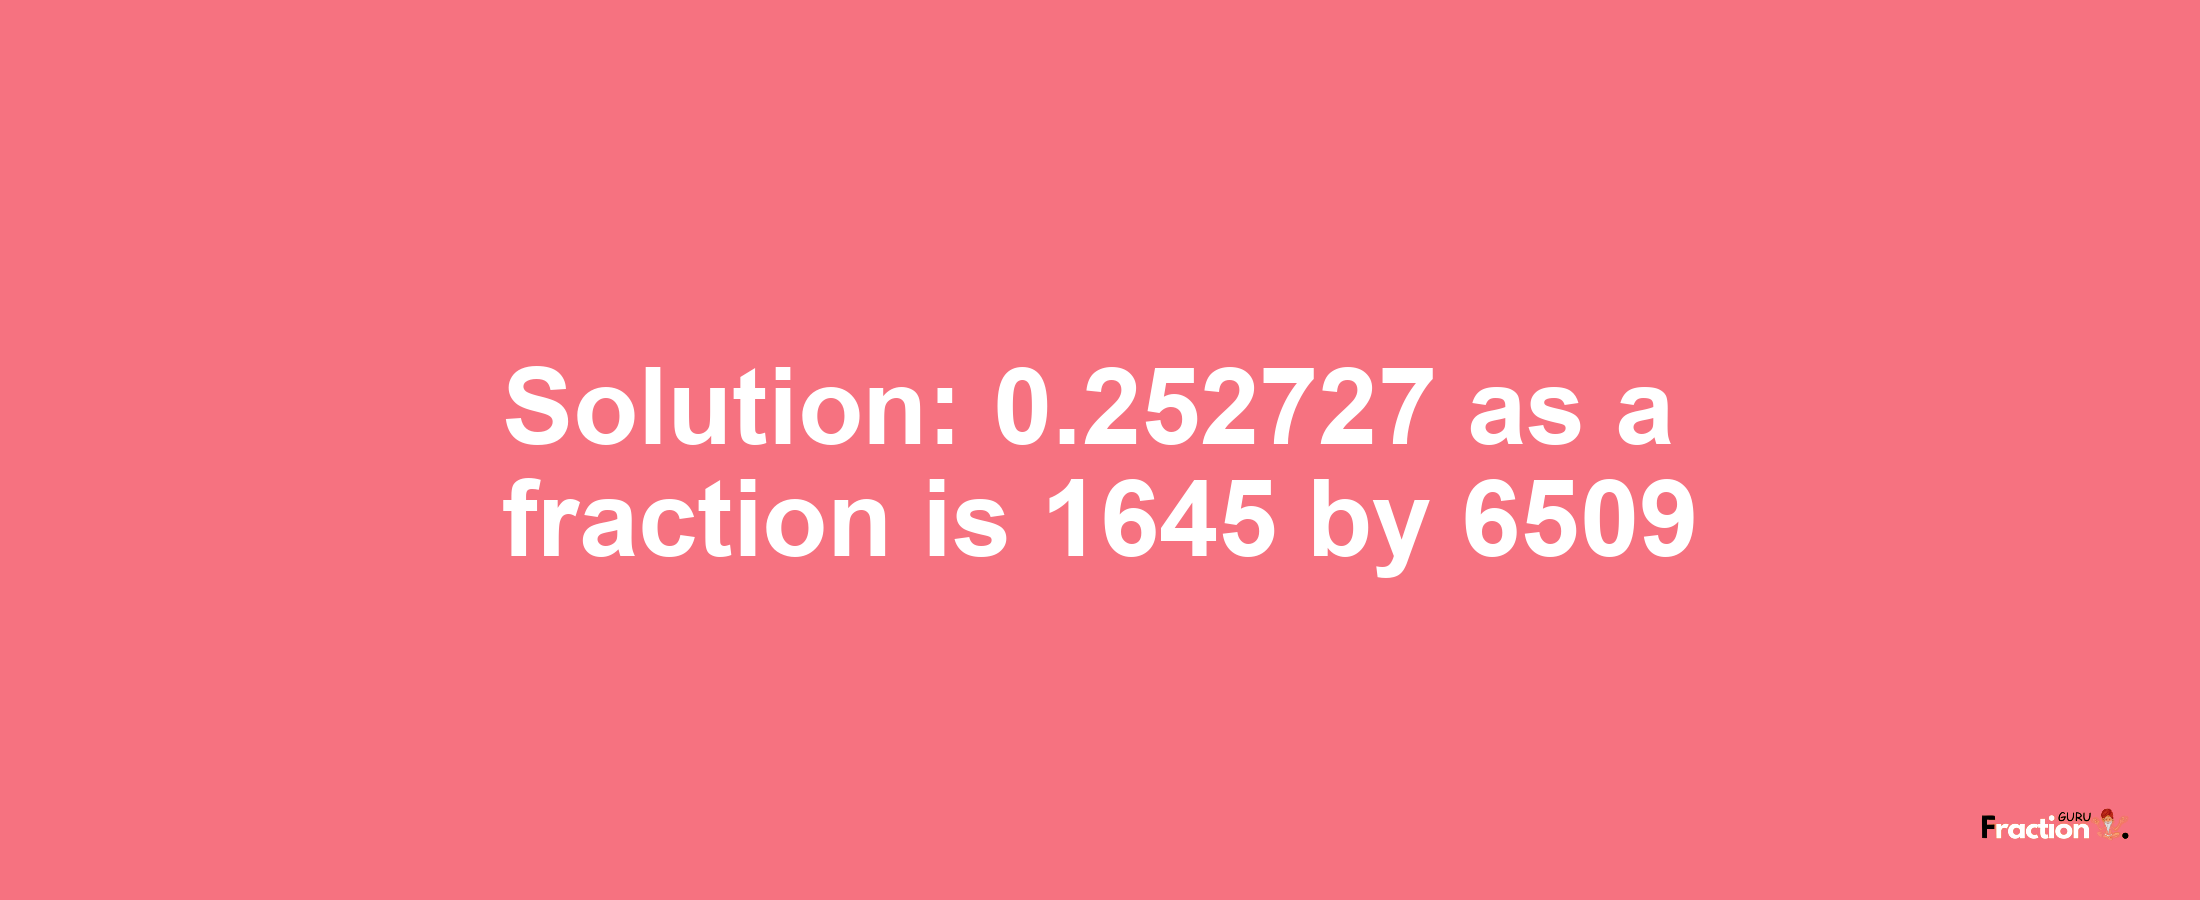 Solution:0.252727 as a fraction is 1645/6509